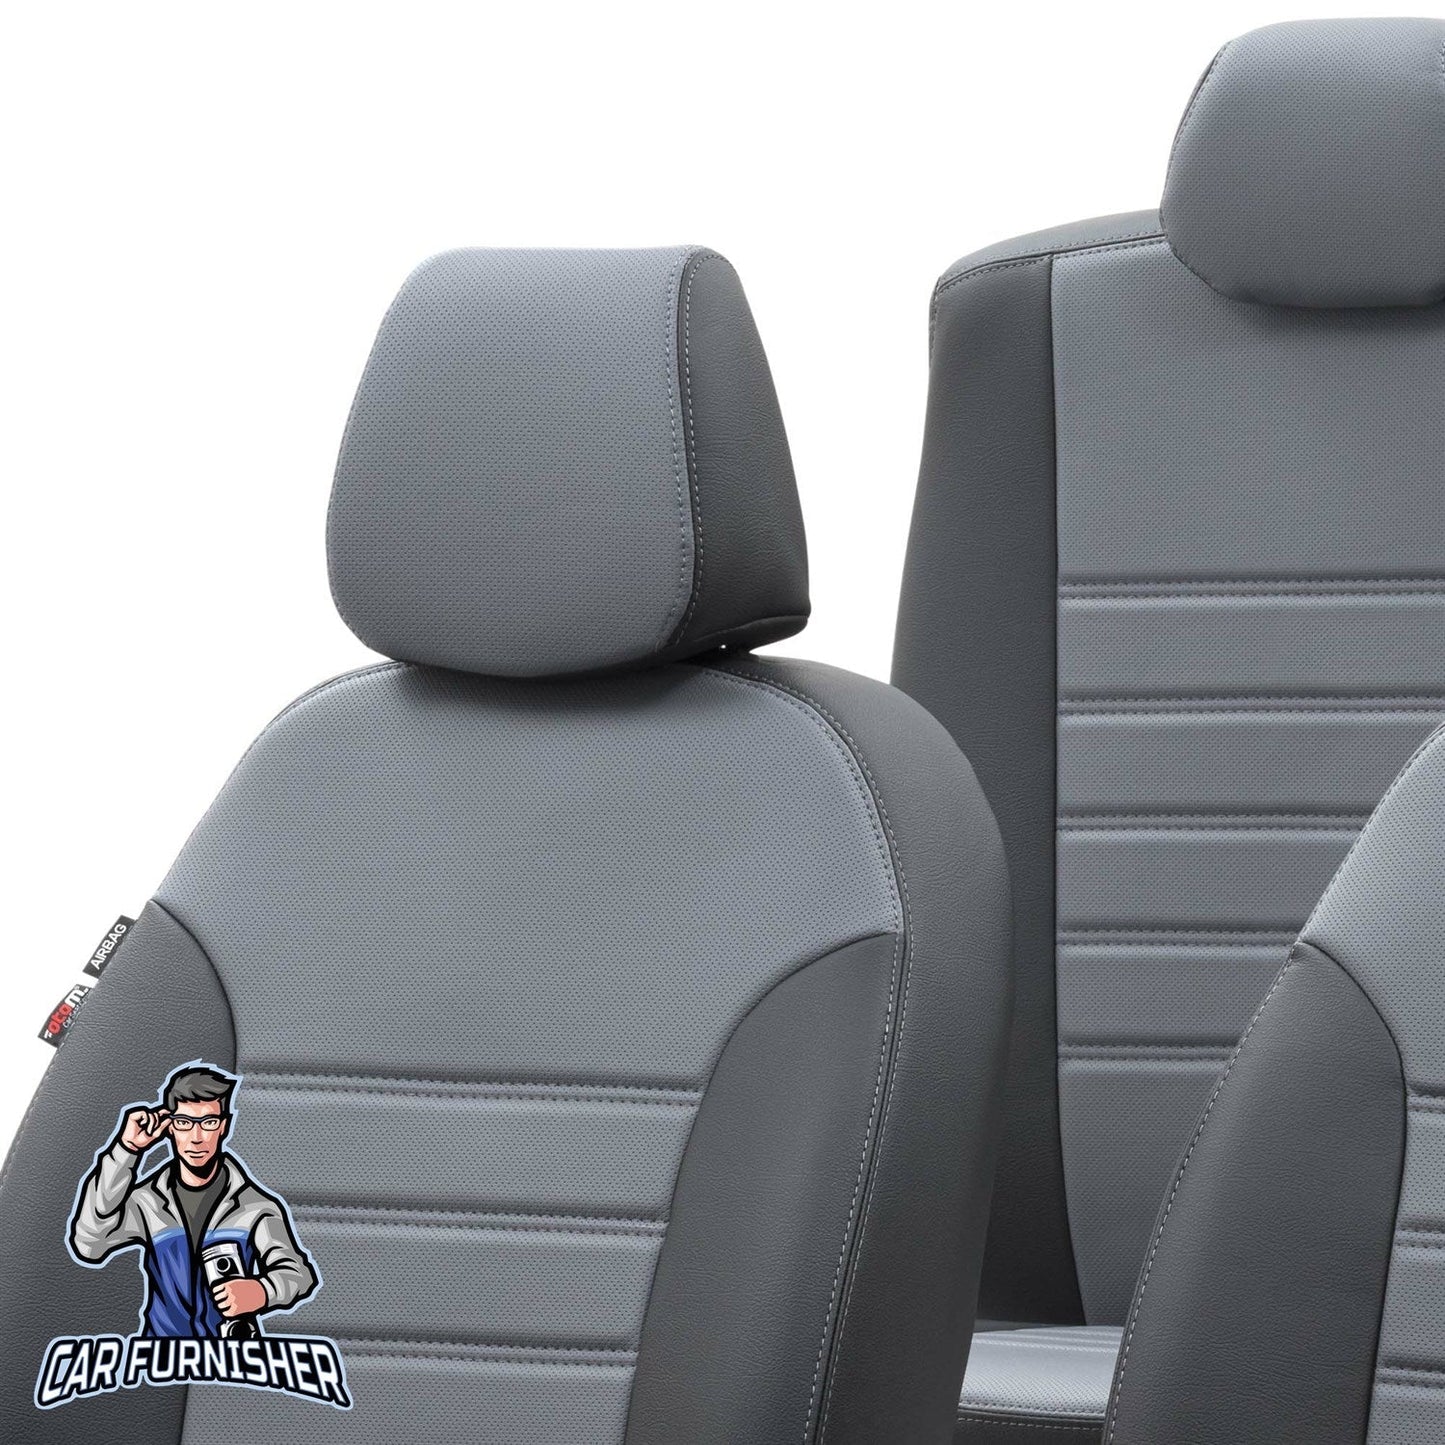 Seat Mii Seat Covers Istanbul Leather Design Smoked Black Leather